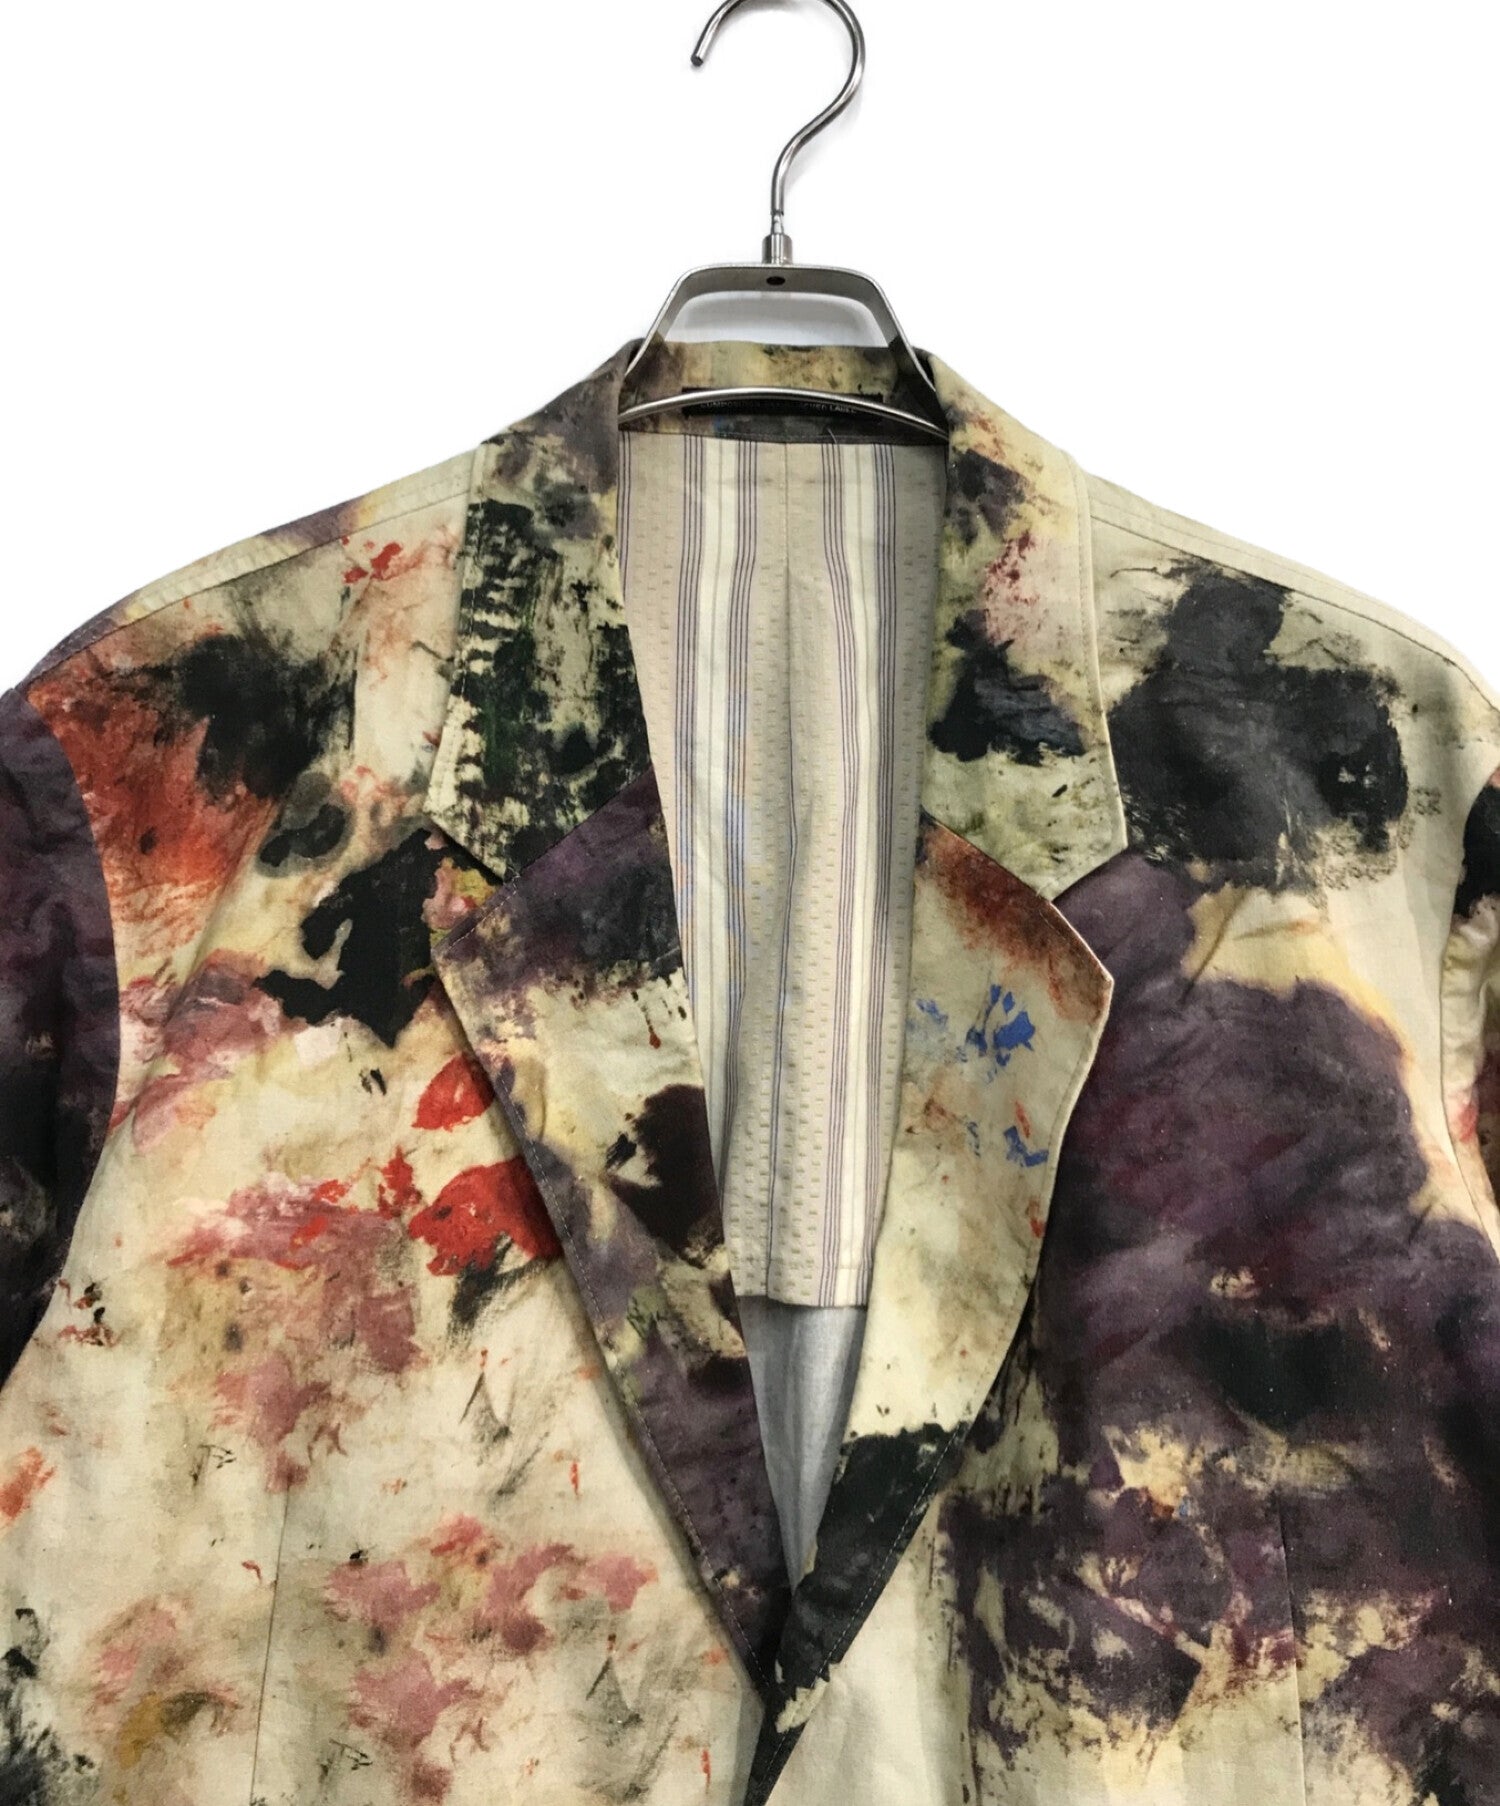 Yohji Yamamoto pour homme Painting Print Tailored Jacket HW-J59-024  All-Print Backless Jacket 18ss Look27 Beige HW-J59-024